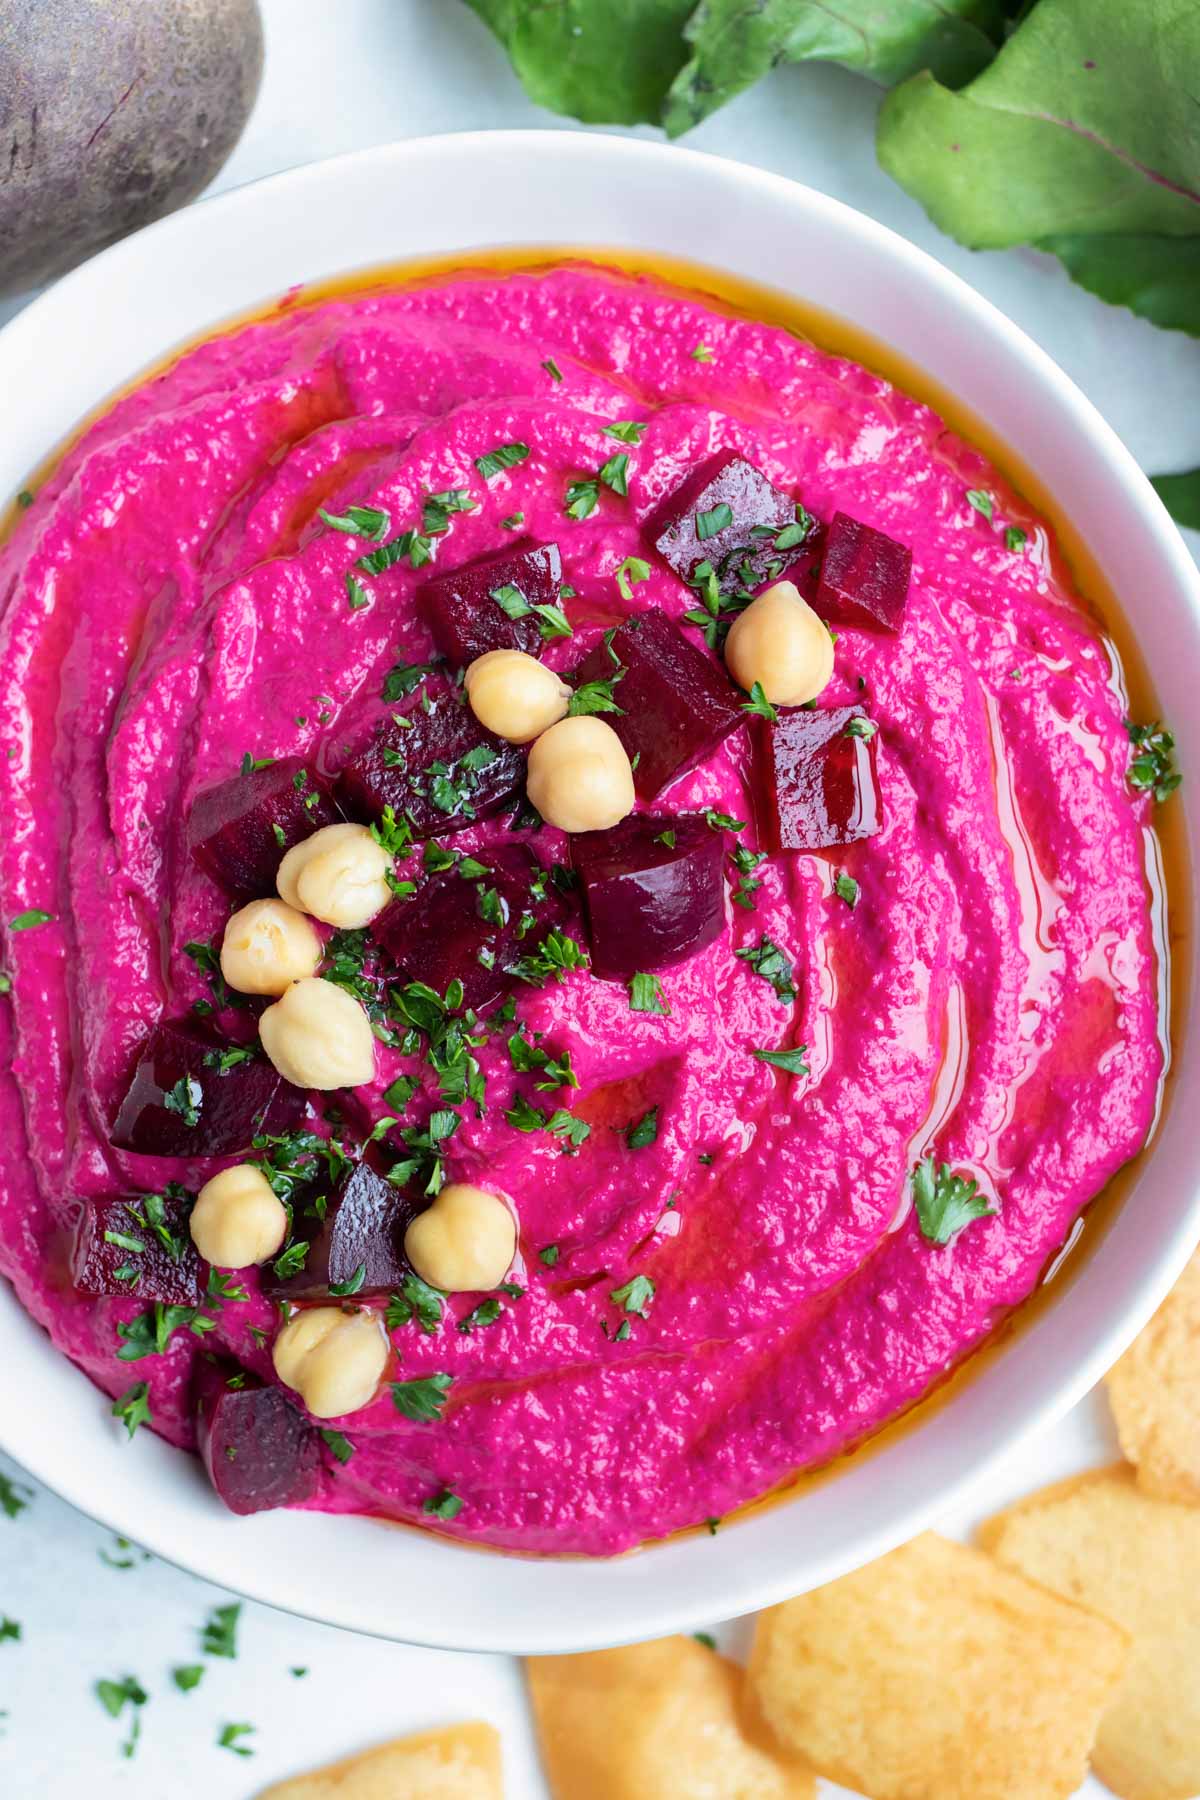 Roasted beet hummus is served in a bowl for dipping vegetables and crackers.